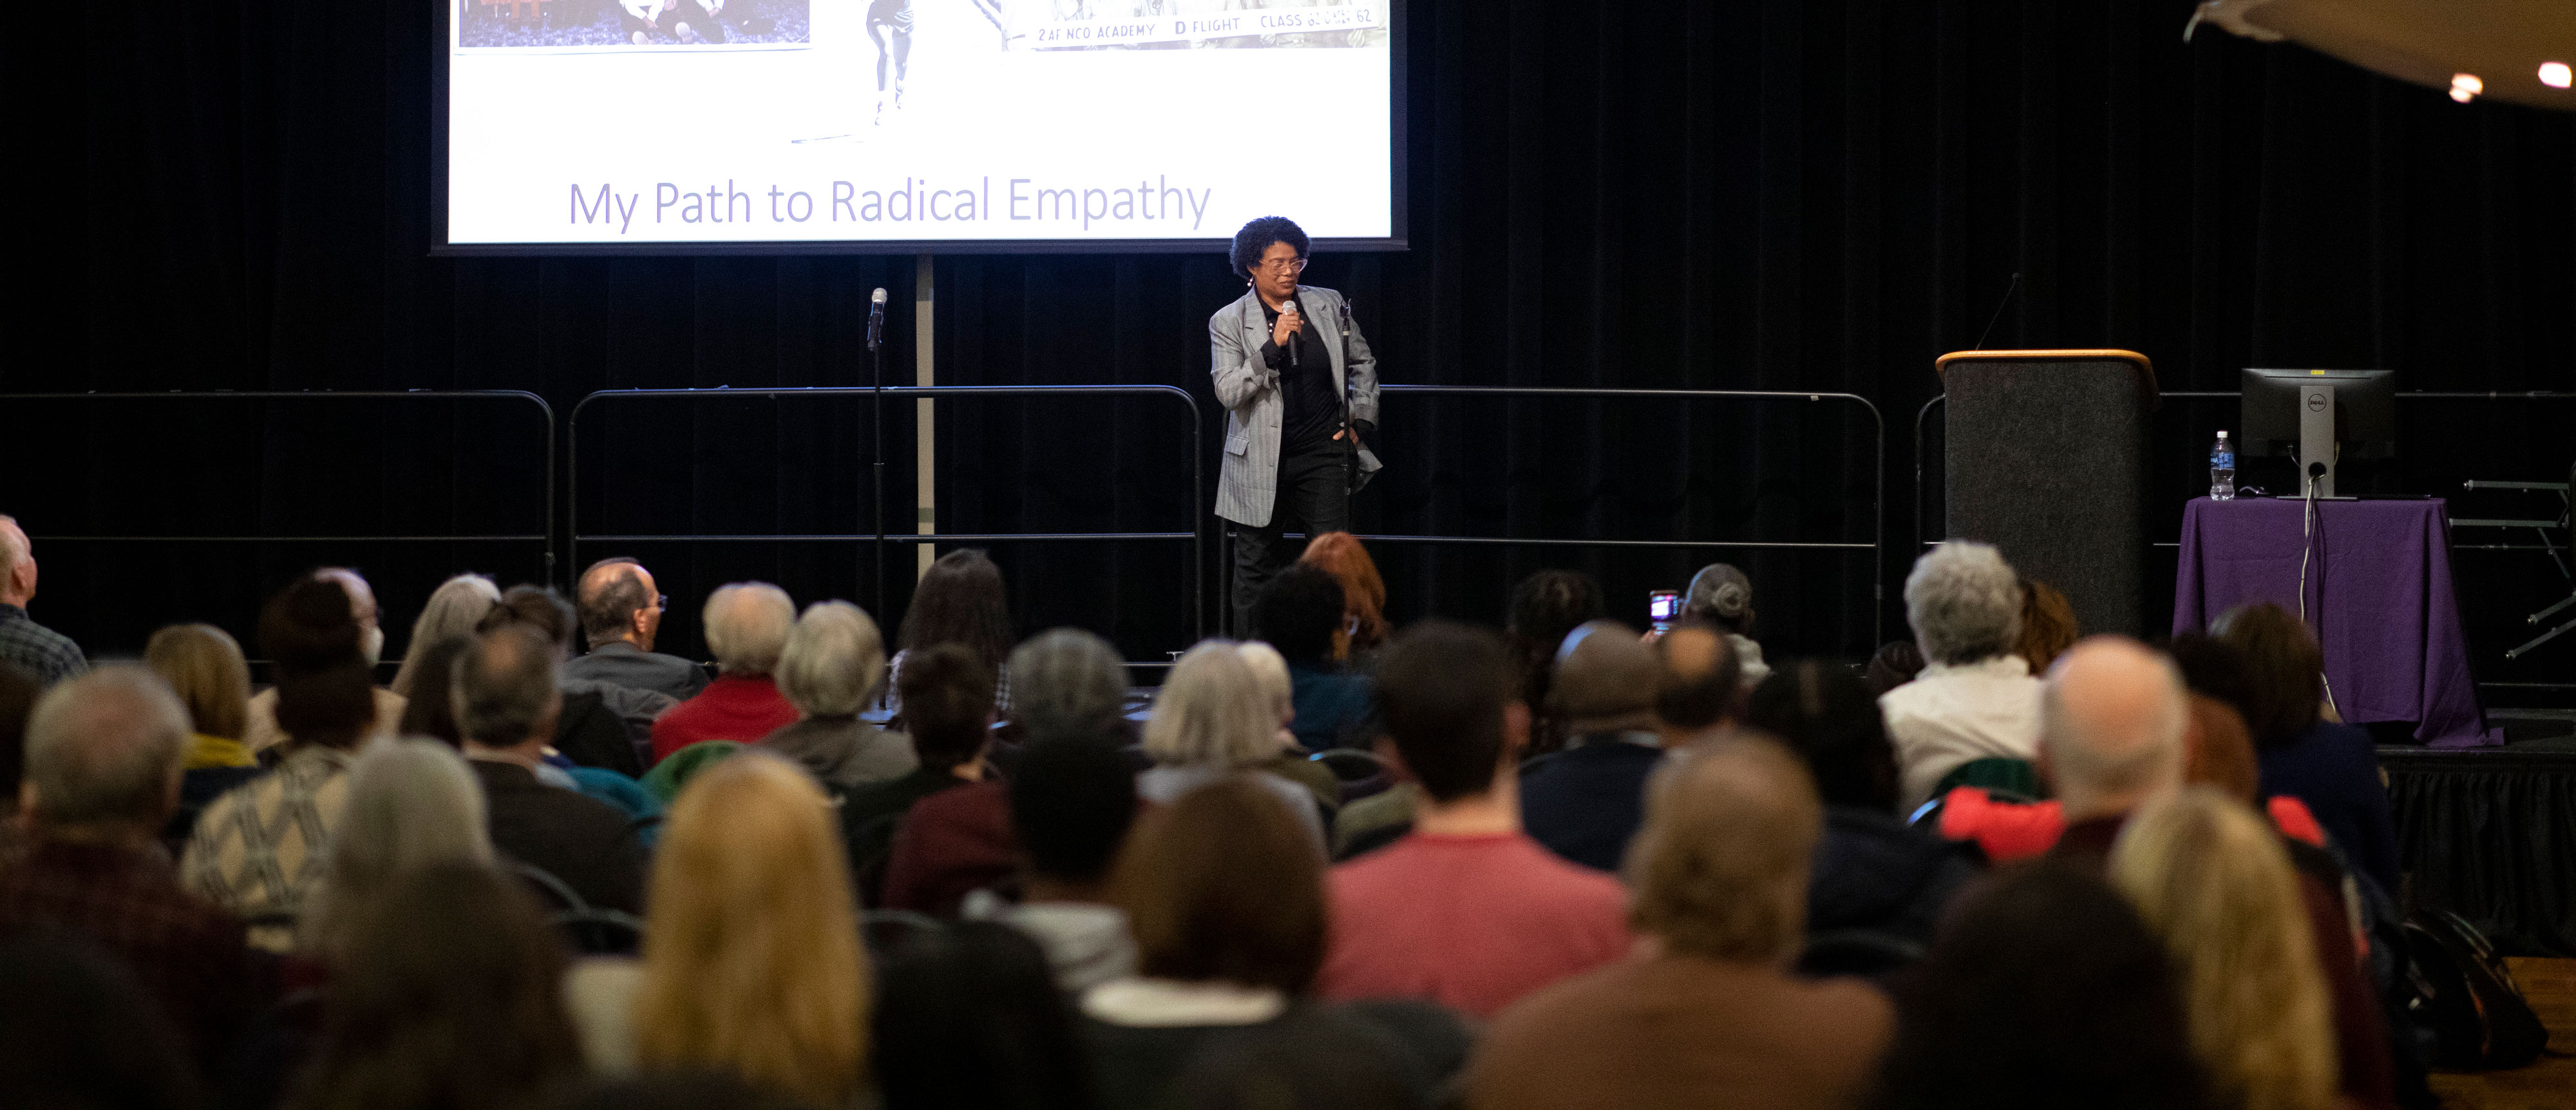 Terri Givens stands on stage before a presentation slide that says "My path to radical empathy," and speaks to her a seated audience using a microphone.